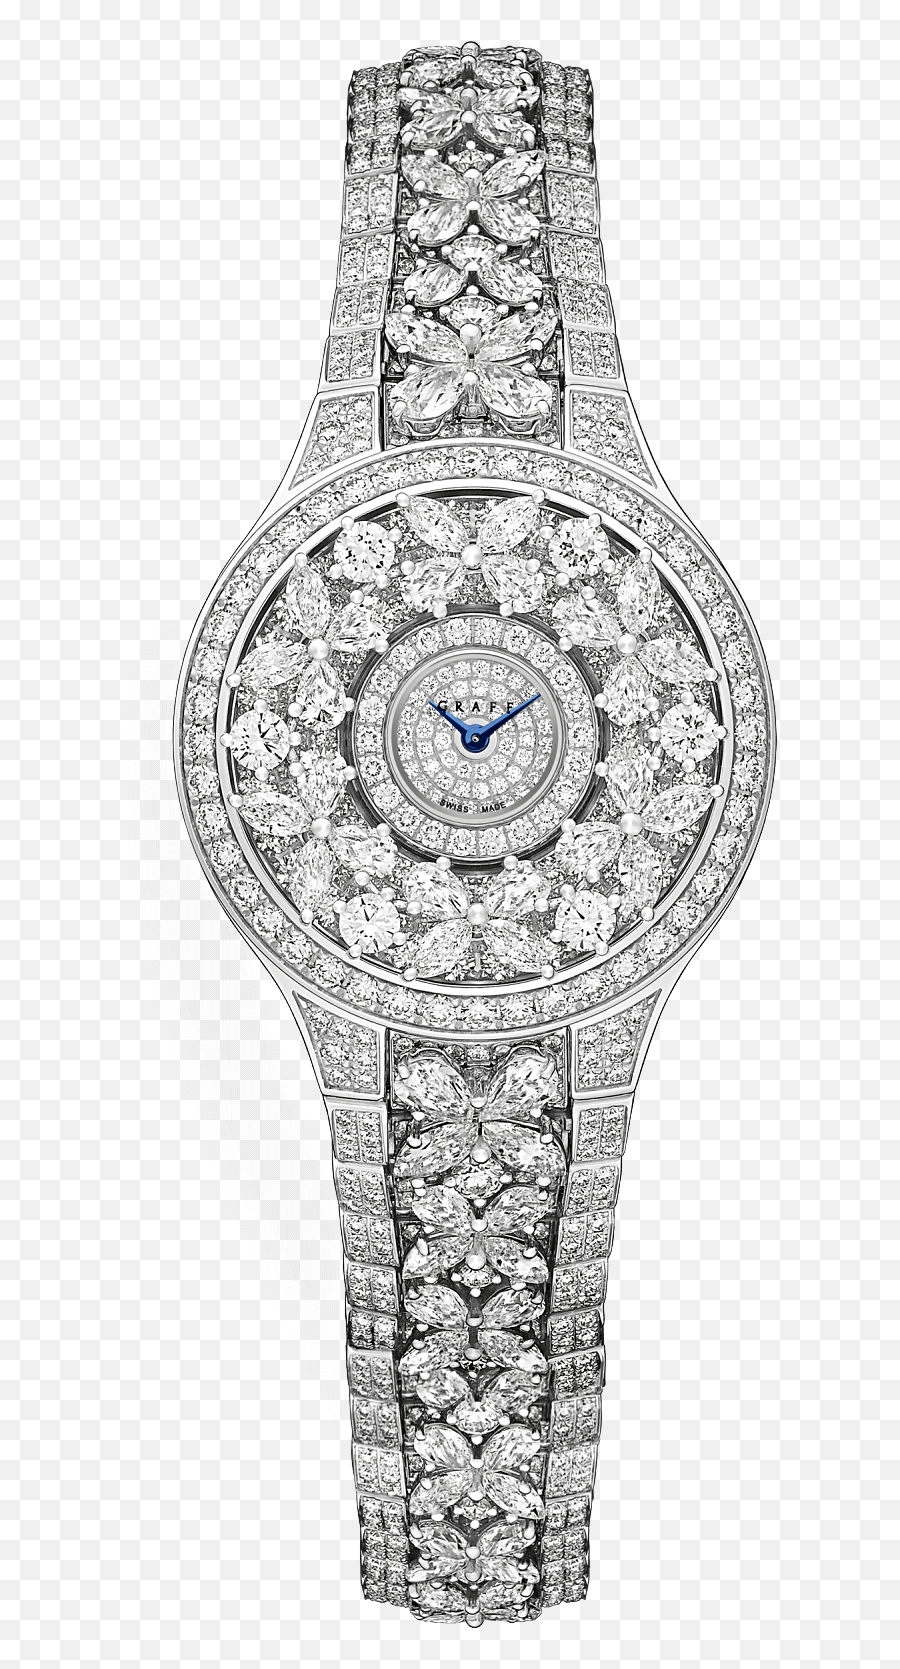 Diamond Watch Png Images Collection For Free Download - Price Of Graff Butterfly Watch Emoji,Black Diamond Emoji